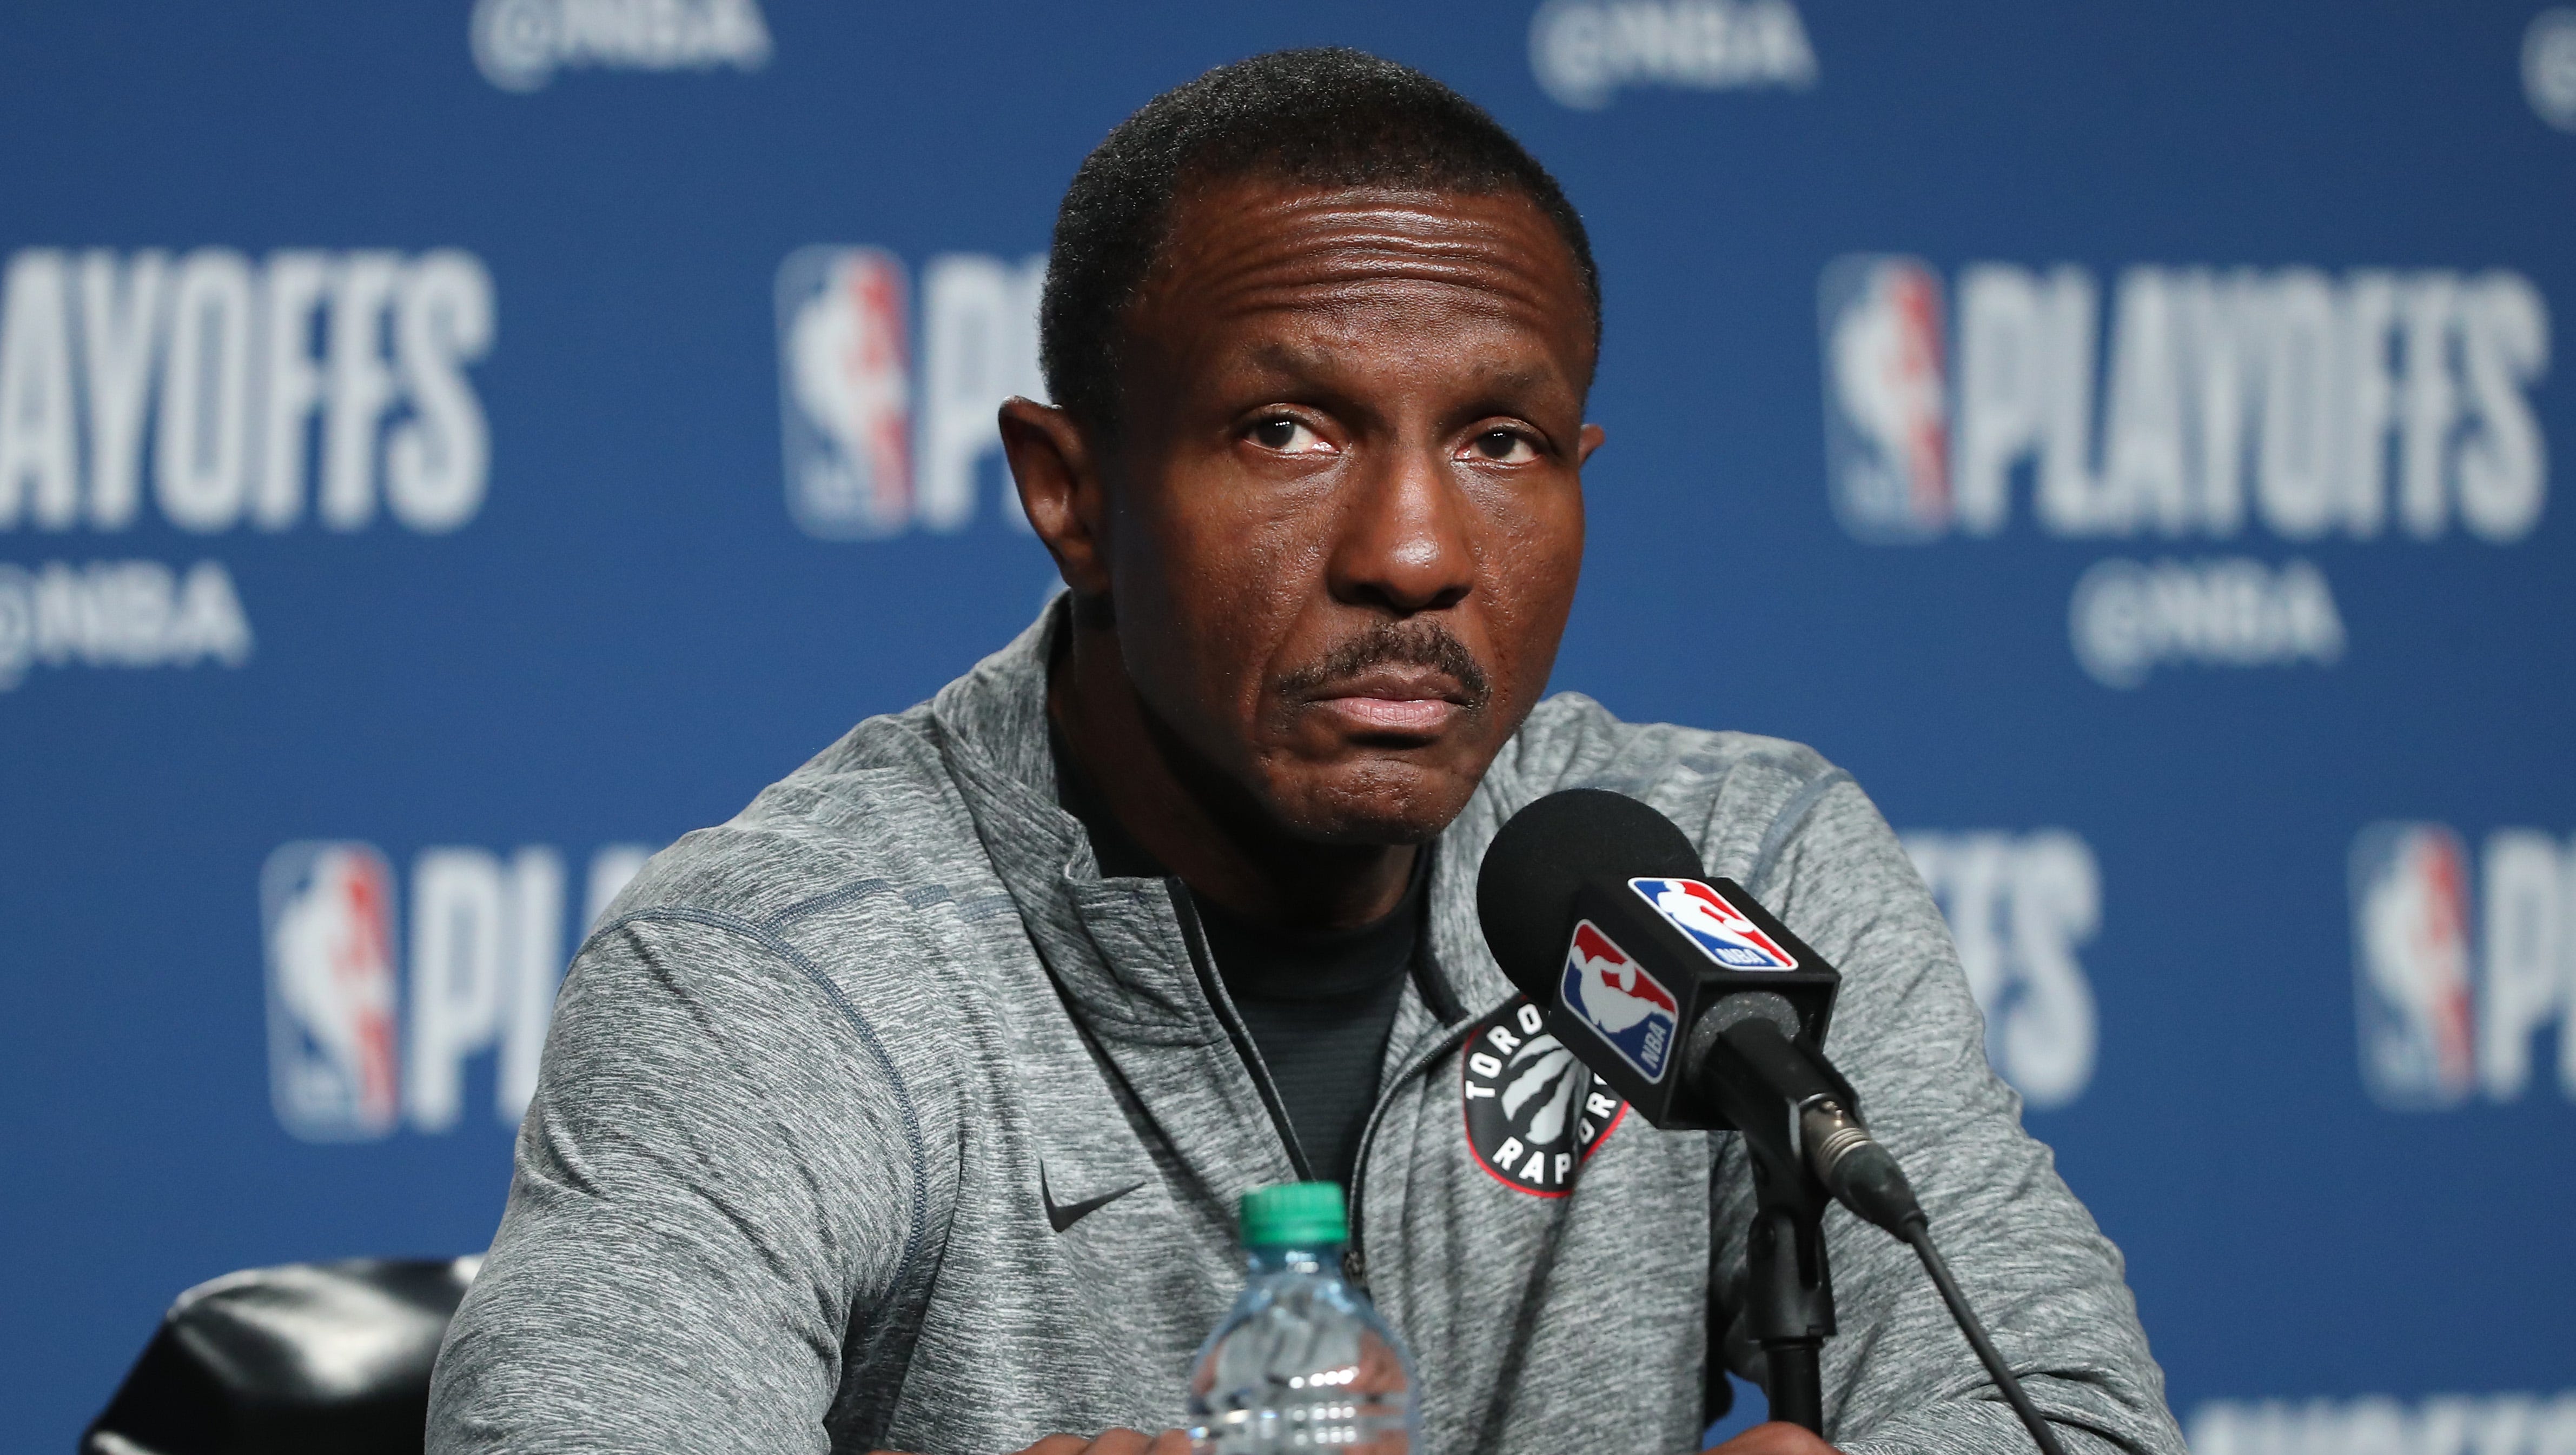 Head coach Dwane Casey of the Toronto Raptors talks to the media before the start of their game against the Washington Wizards prior to Game One of the first round of the 2018 NBA Playoffs at Air Canada Centre on April 14, 2018 in Toronto, Canada.